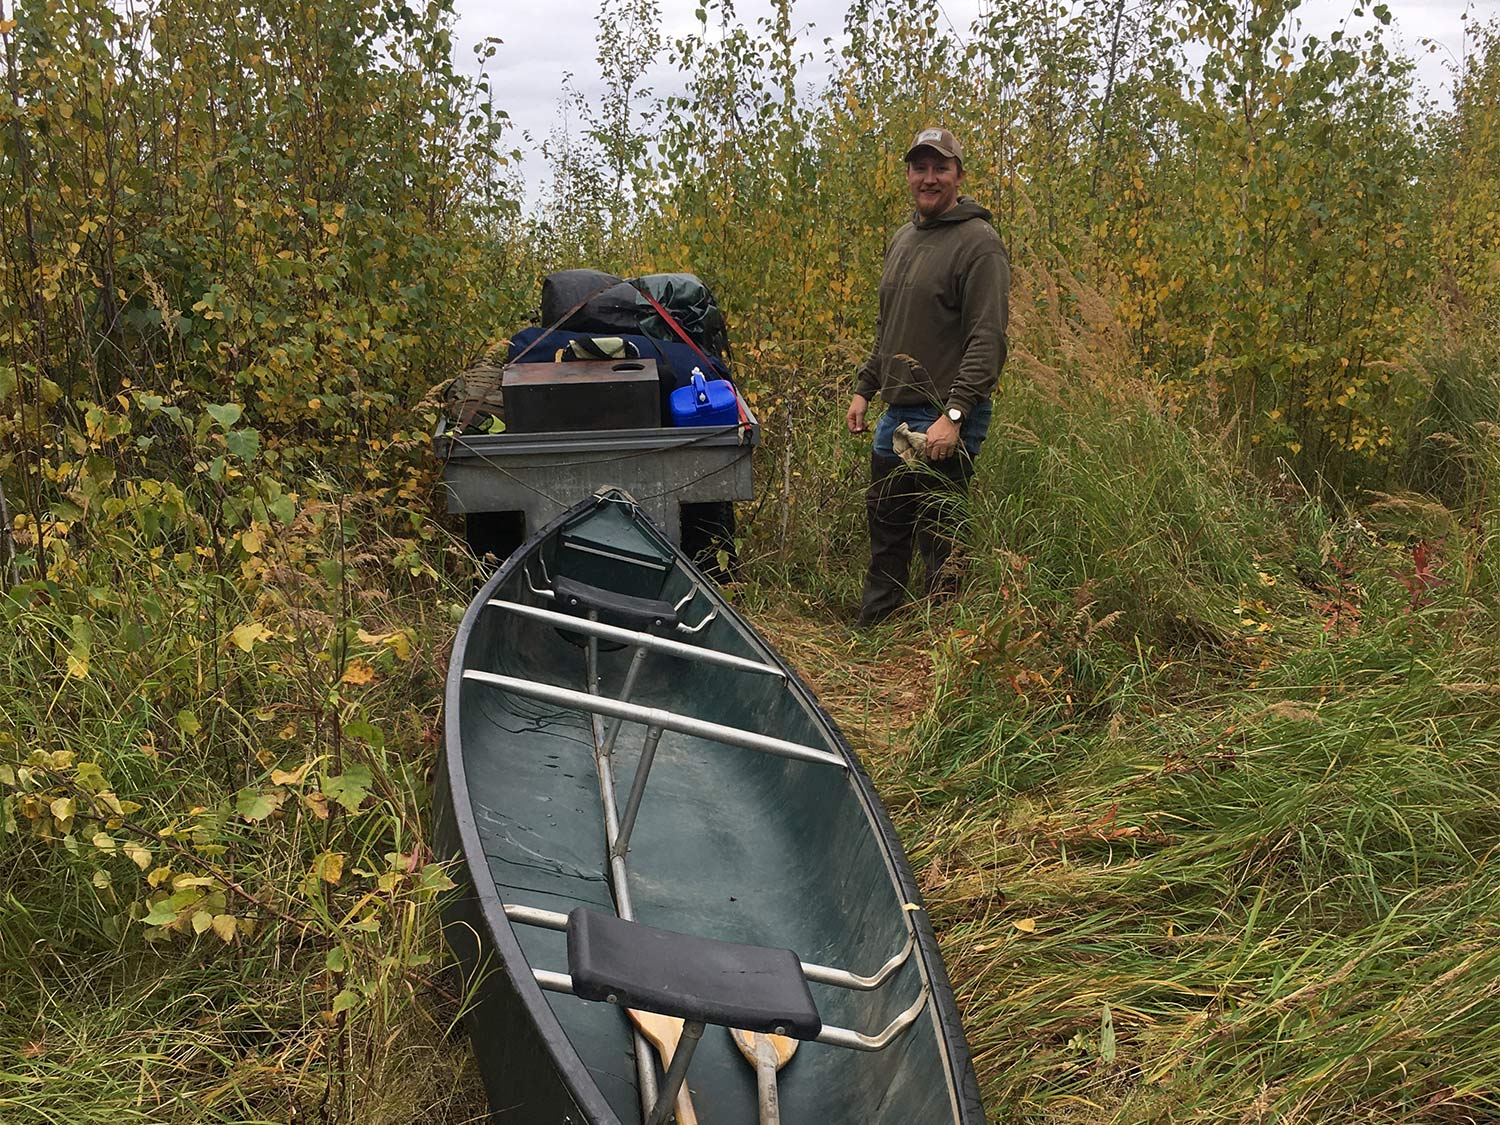 A four-wheeled ATV drags a canoe behind it on an overgrown hunting trail.